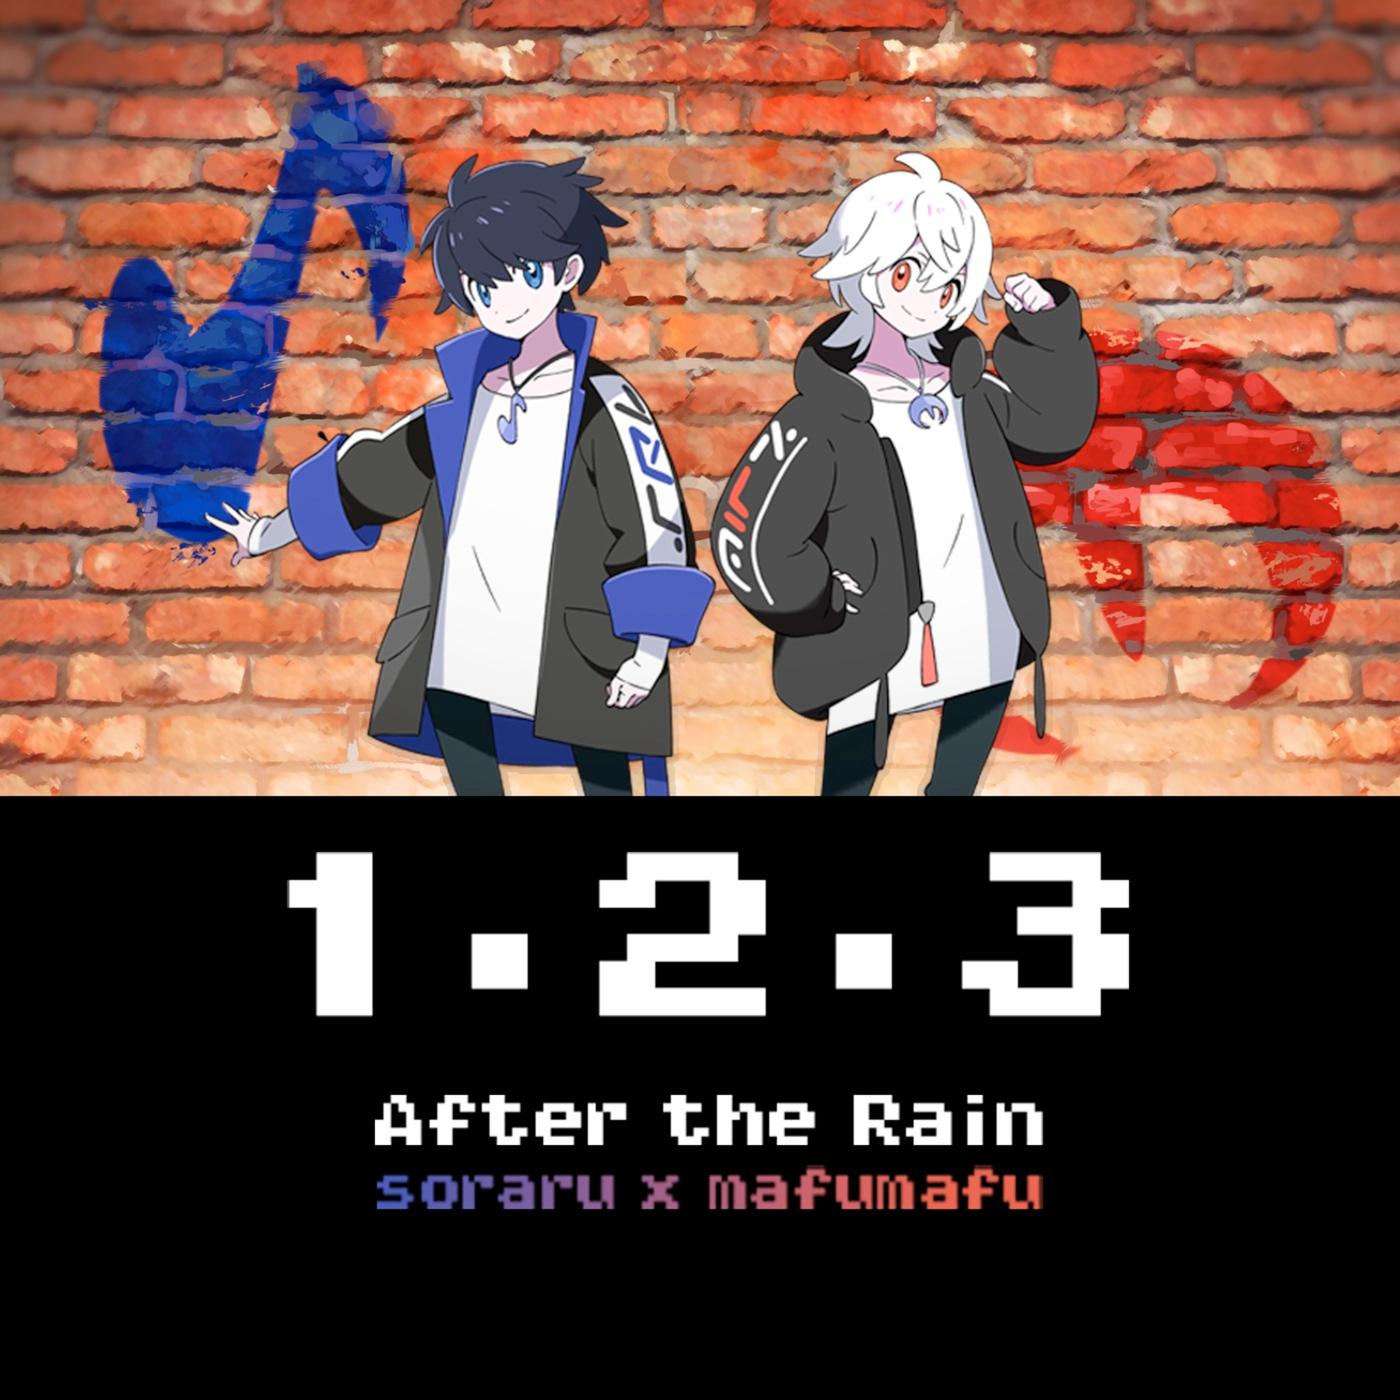 After the Rain - １・２・３